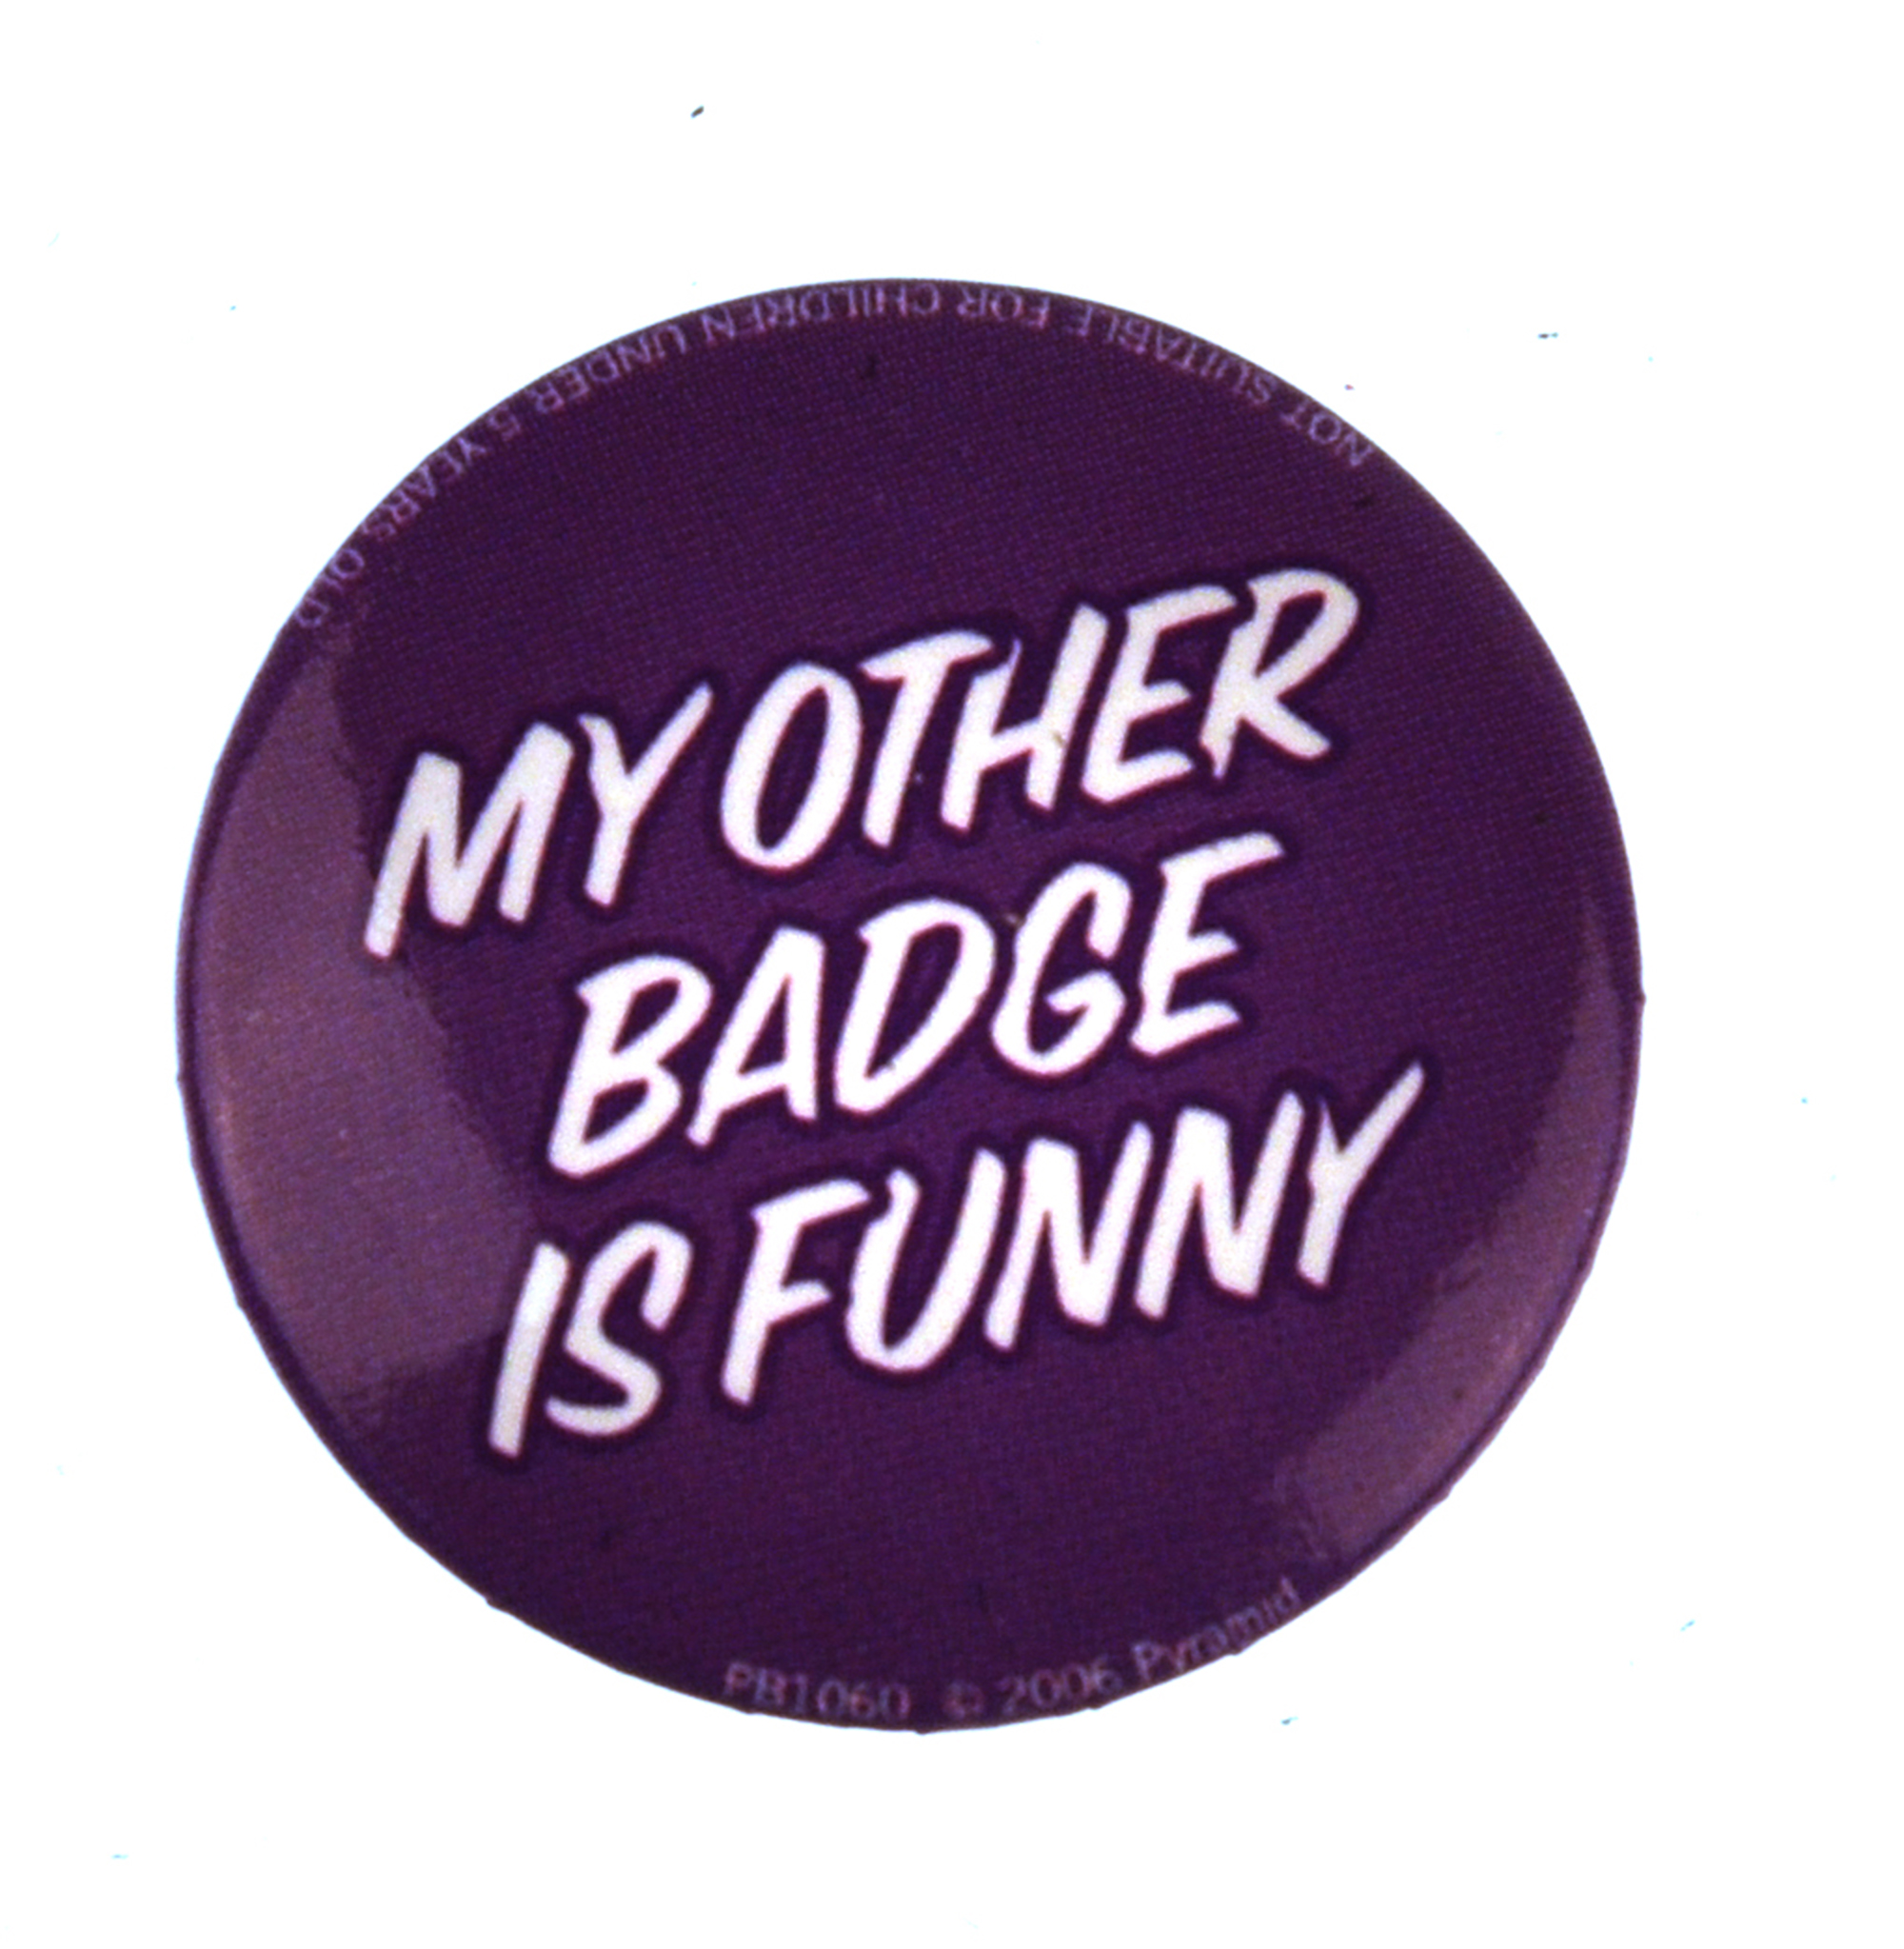 BADGE112-my-other-badge-is-funny-badge.JPG